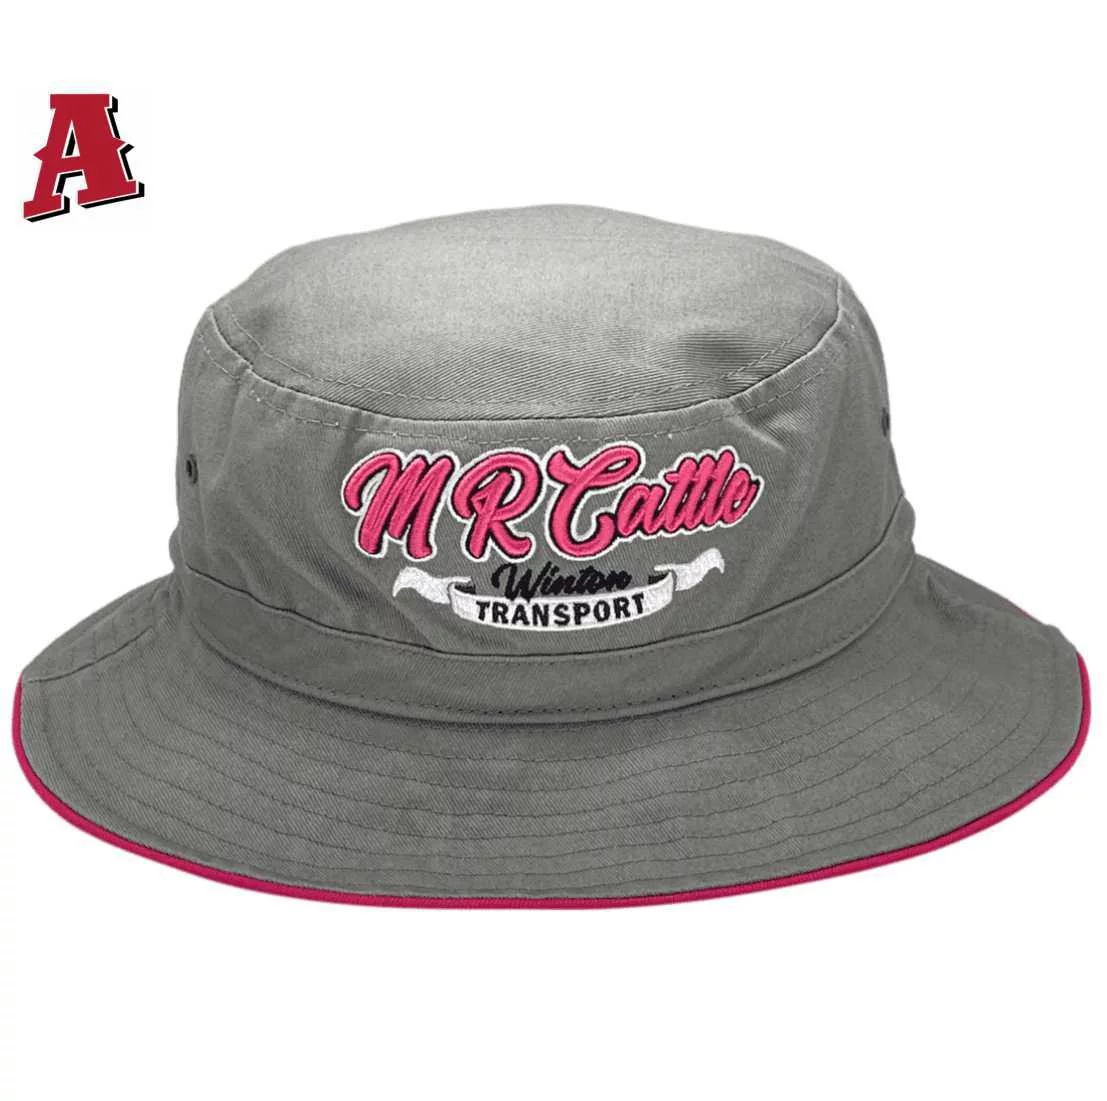 MR Cattle Winton Transport Winton Qld Aussies Bucket Hat with Adjustable Crown Toggle and Optional Brim Size 5cm-7.5cm Grey Pink